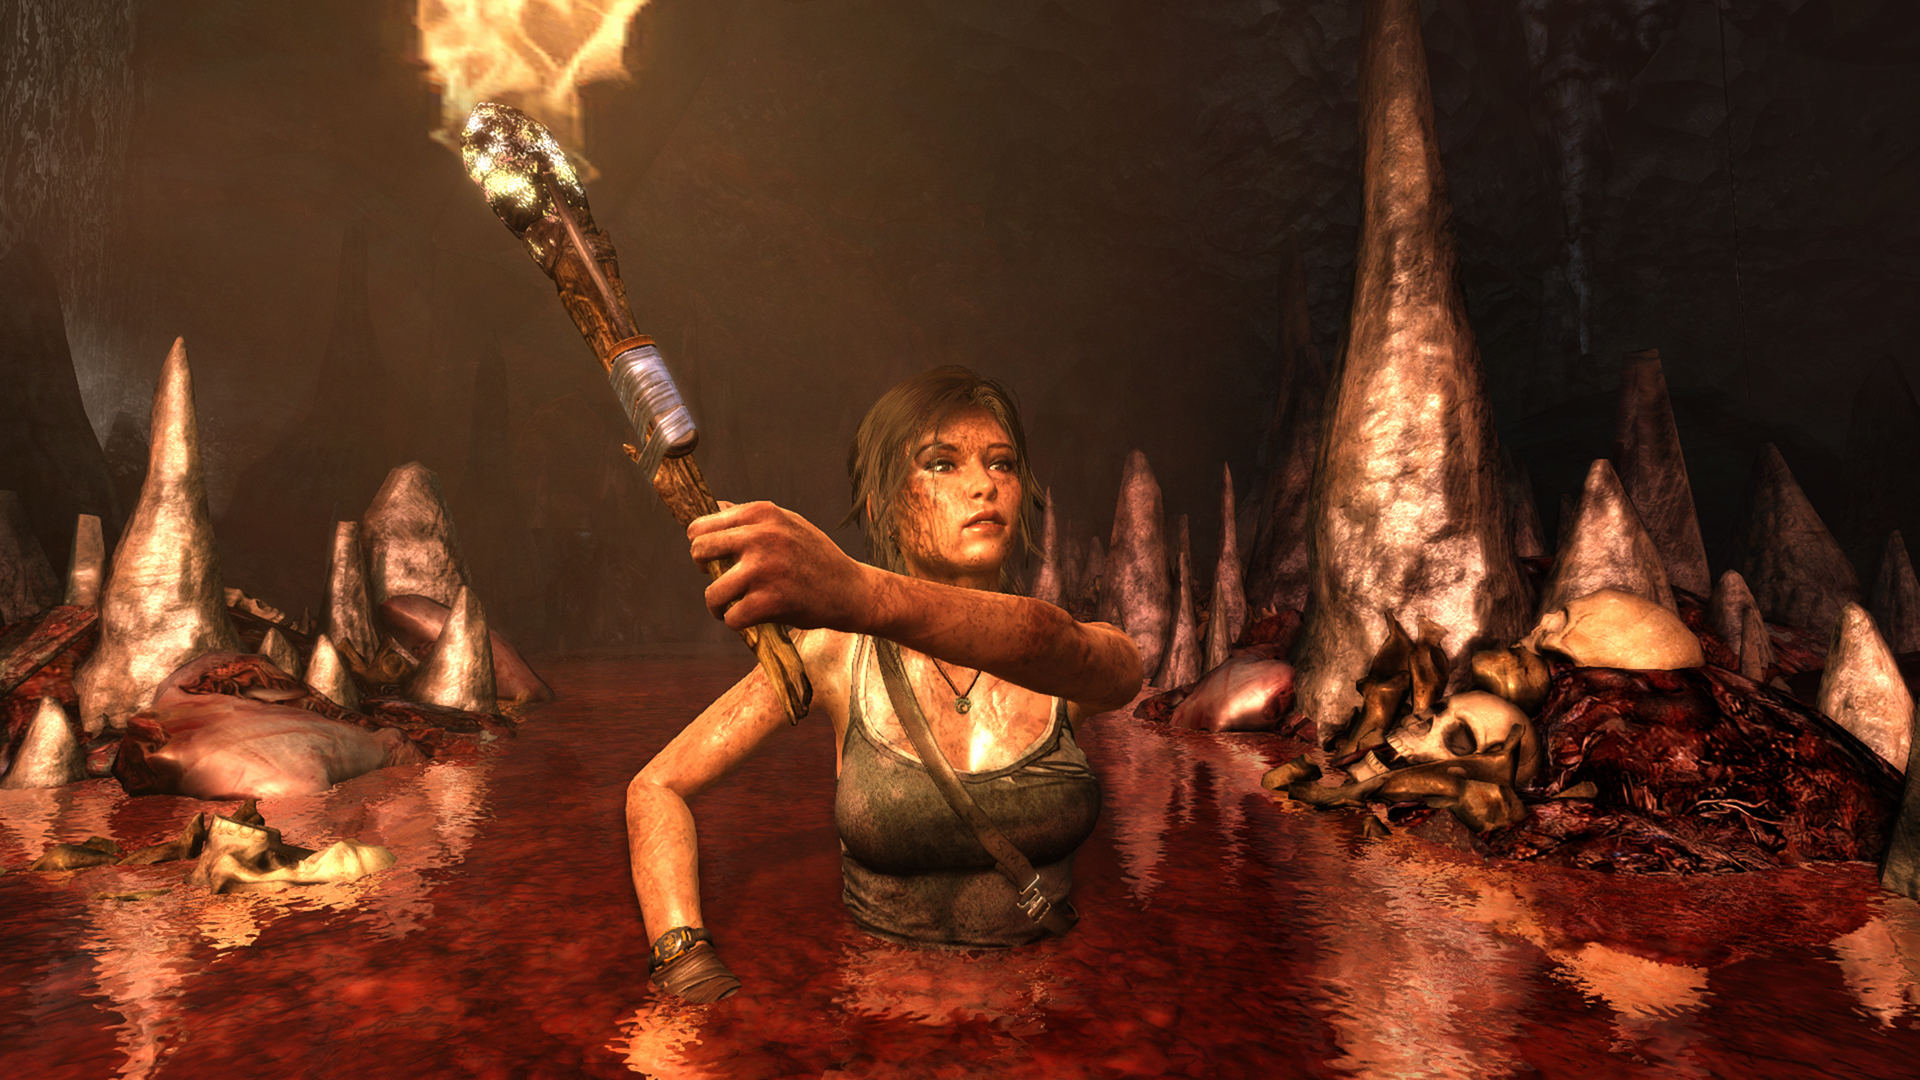 Lara Croft exploring a bloody and sinister cave.